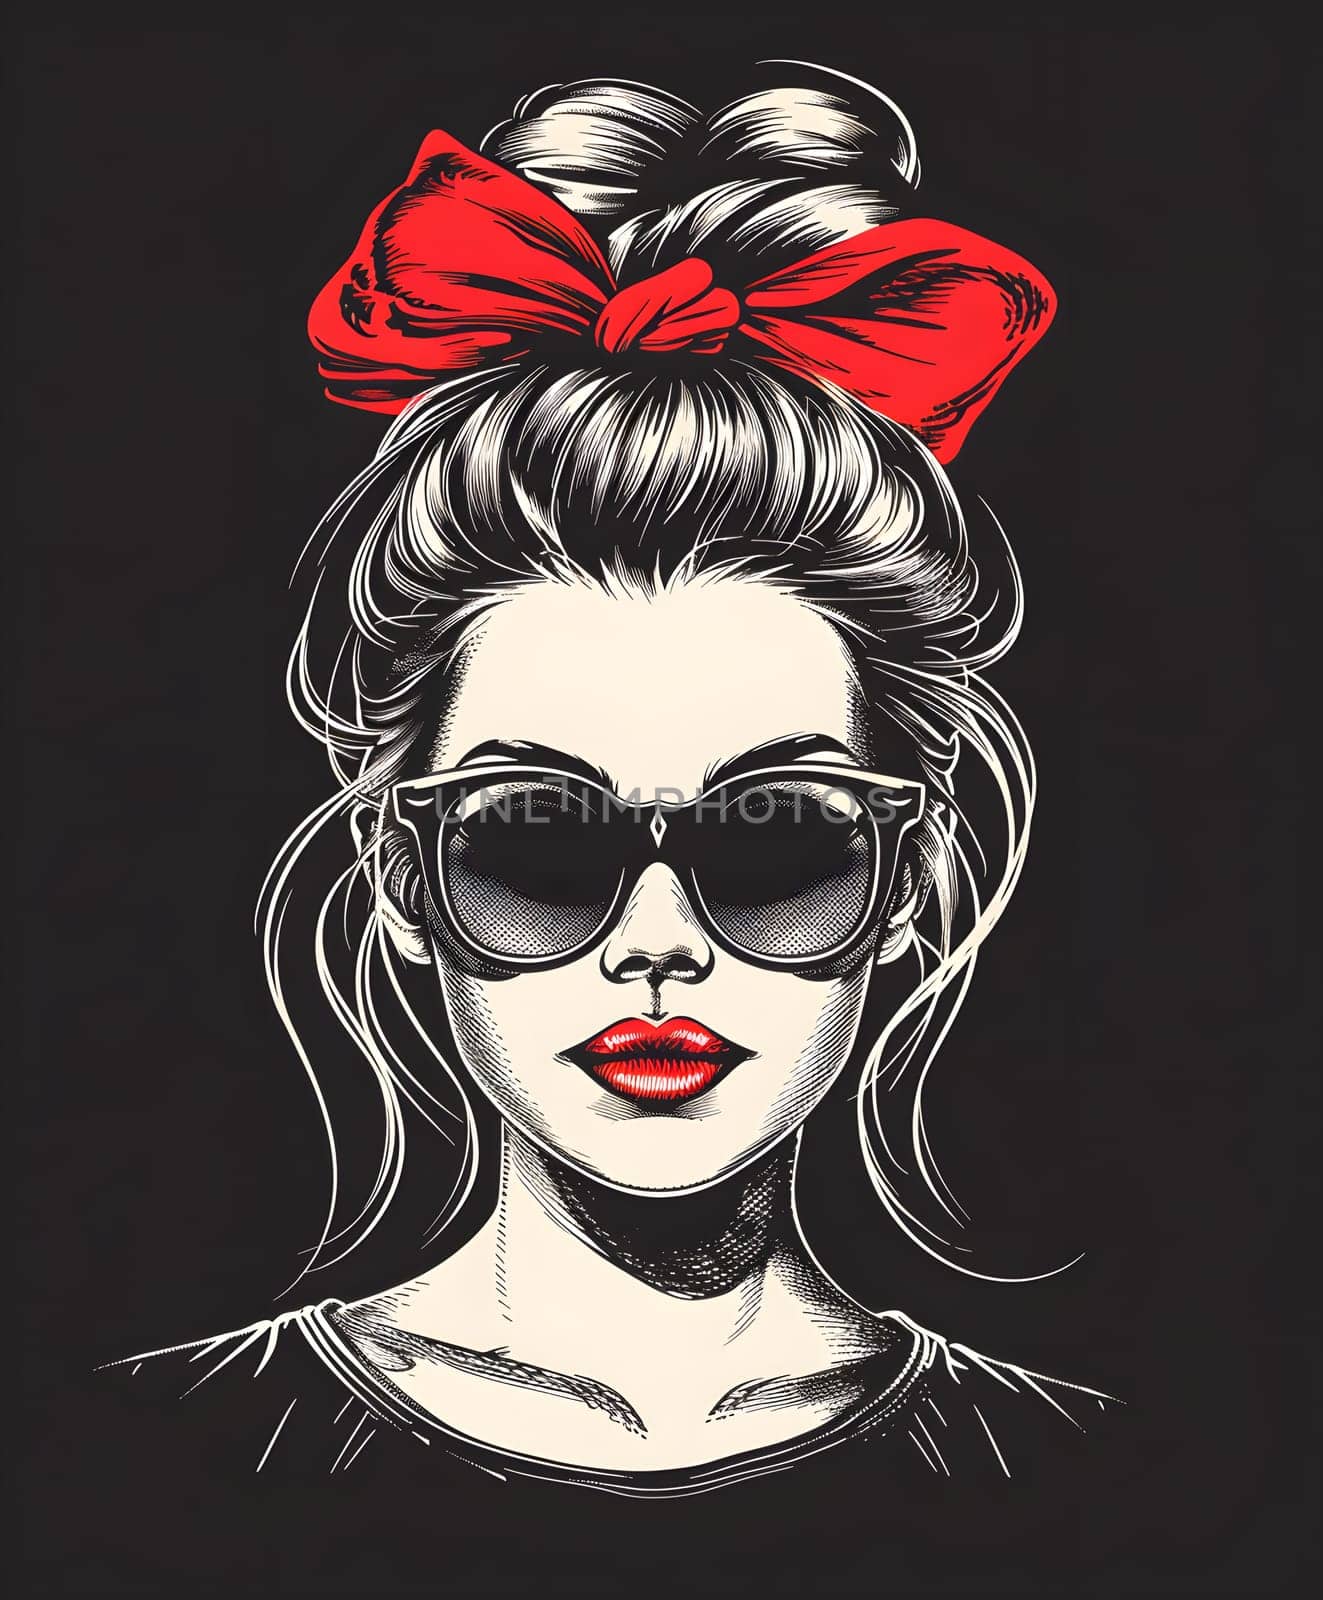 A woman with stylish eyewear and a bold red bow in her hair by Nadtochiy